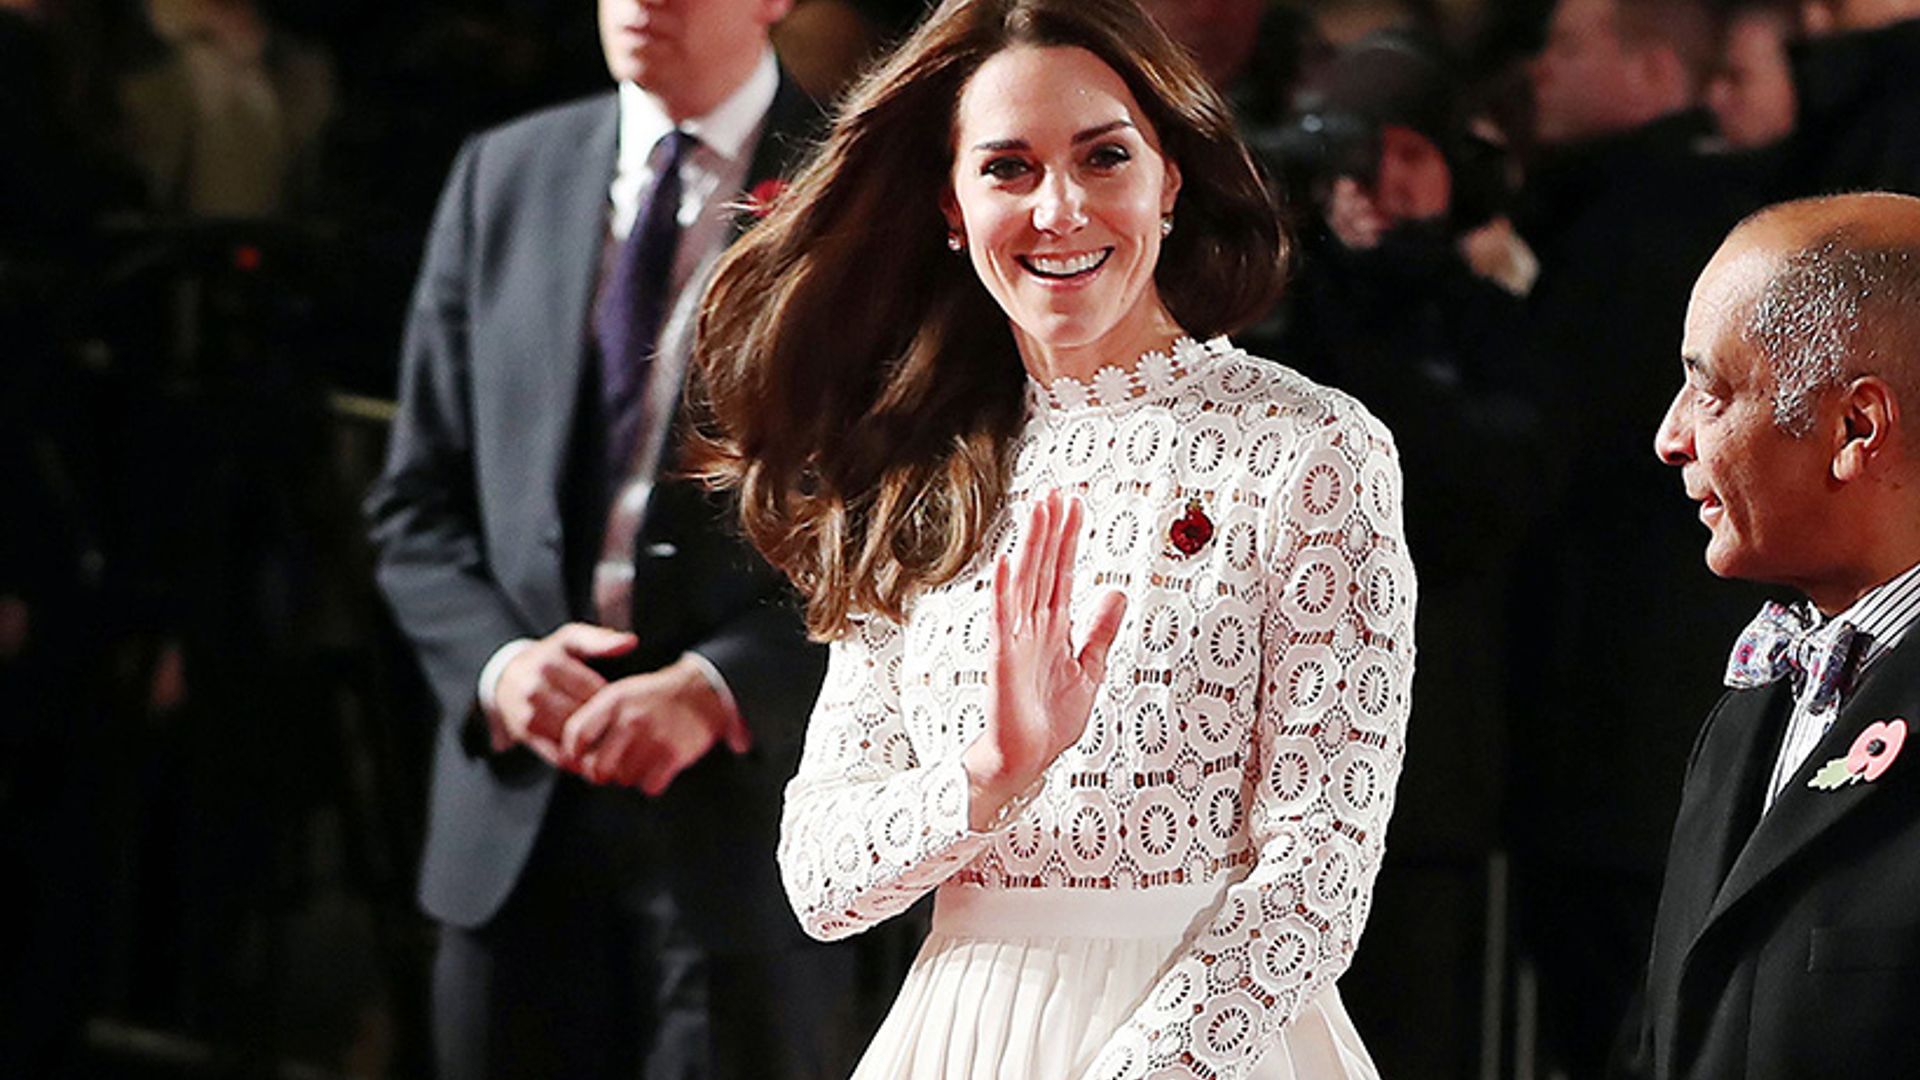 Two women were spotted in the Duchess of Cambridge's £320 Self Portrait dress at Ascot